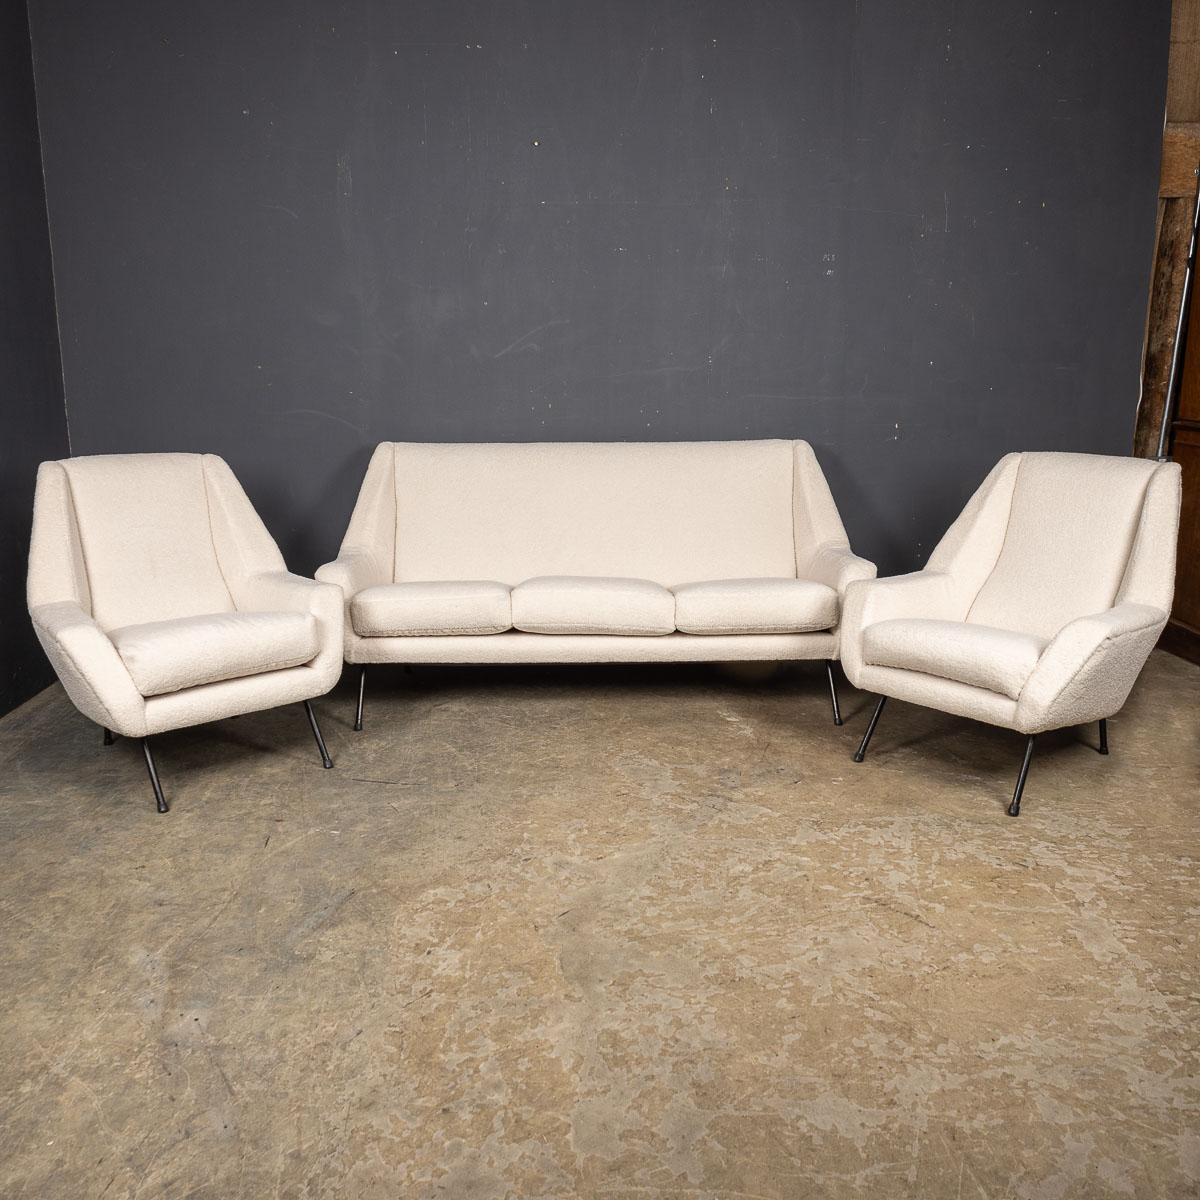 A stunning ensemble of mid-20th Century Italian sofa and armchairs, each featuring elegant metal legs and skilfully reupholstered in a luxurious cream boucle fabric with removable seat cushions. These pieces boast exceptional craftsmanship and are